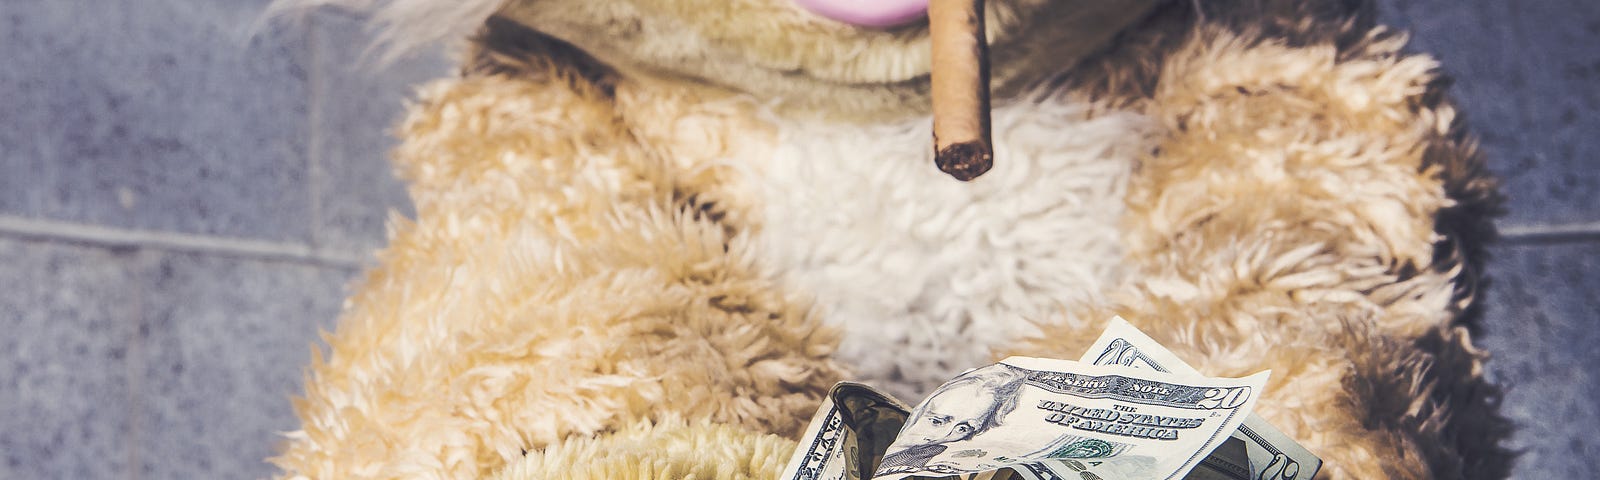 A stuffed rabbit with a Cheshire smile and a cigar in its mouth, grinning at a pile of money.